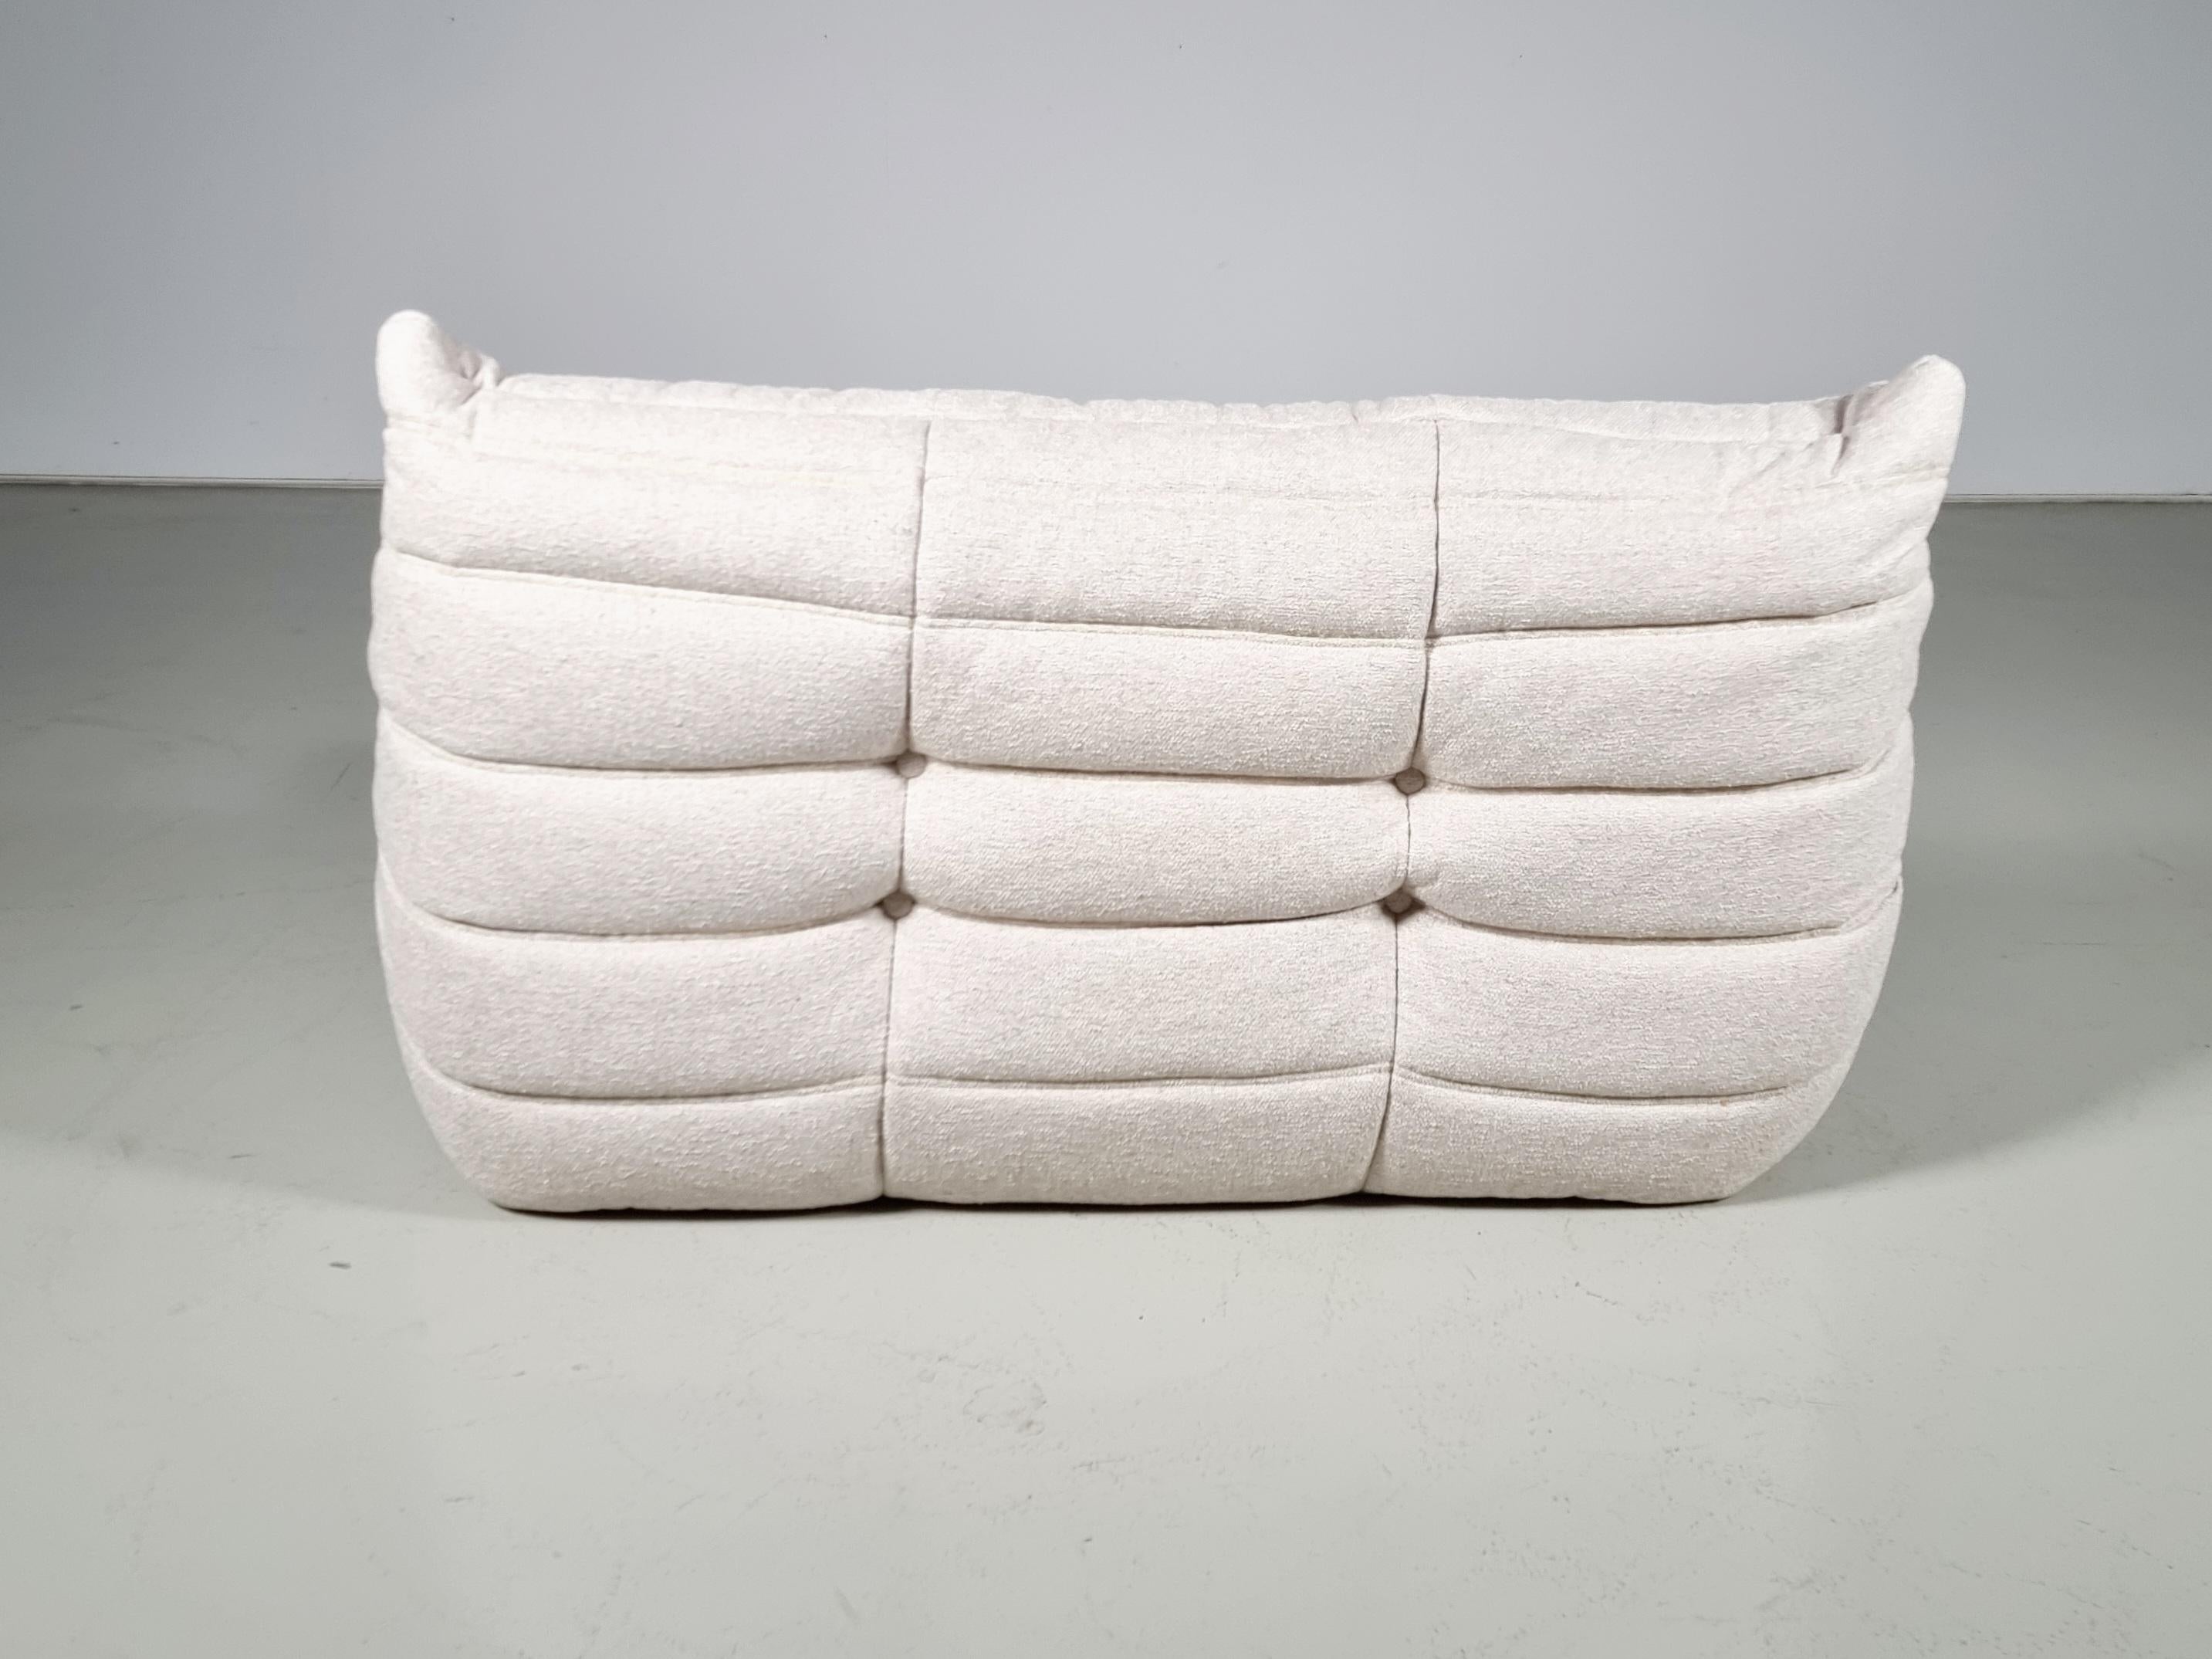 Togo 2-Seater Sofa in cream fabric by Michel Ducaroy for Ligne Roset, 1970s For Sale 1